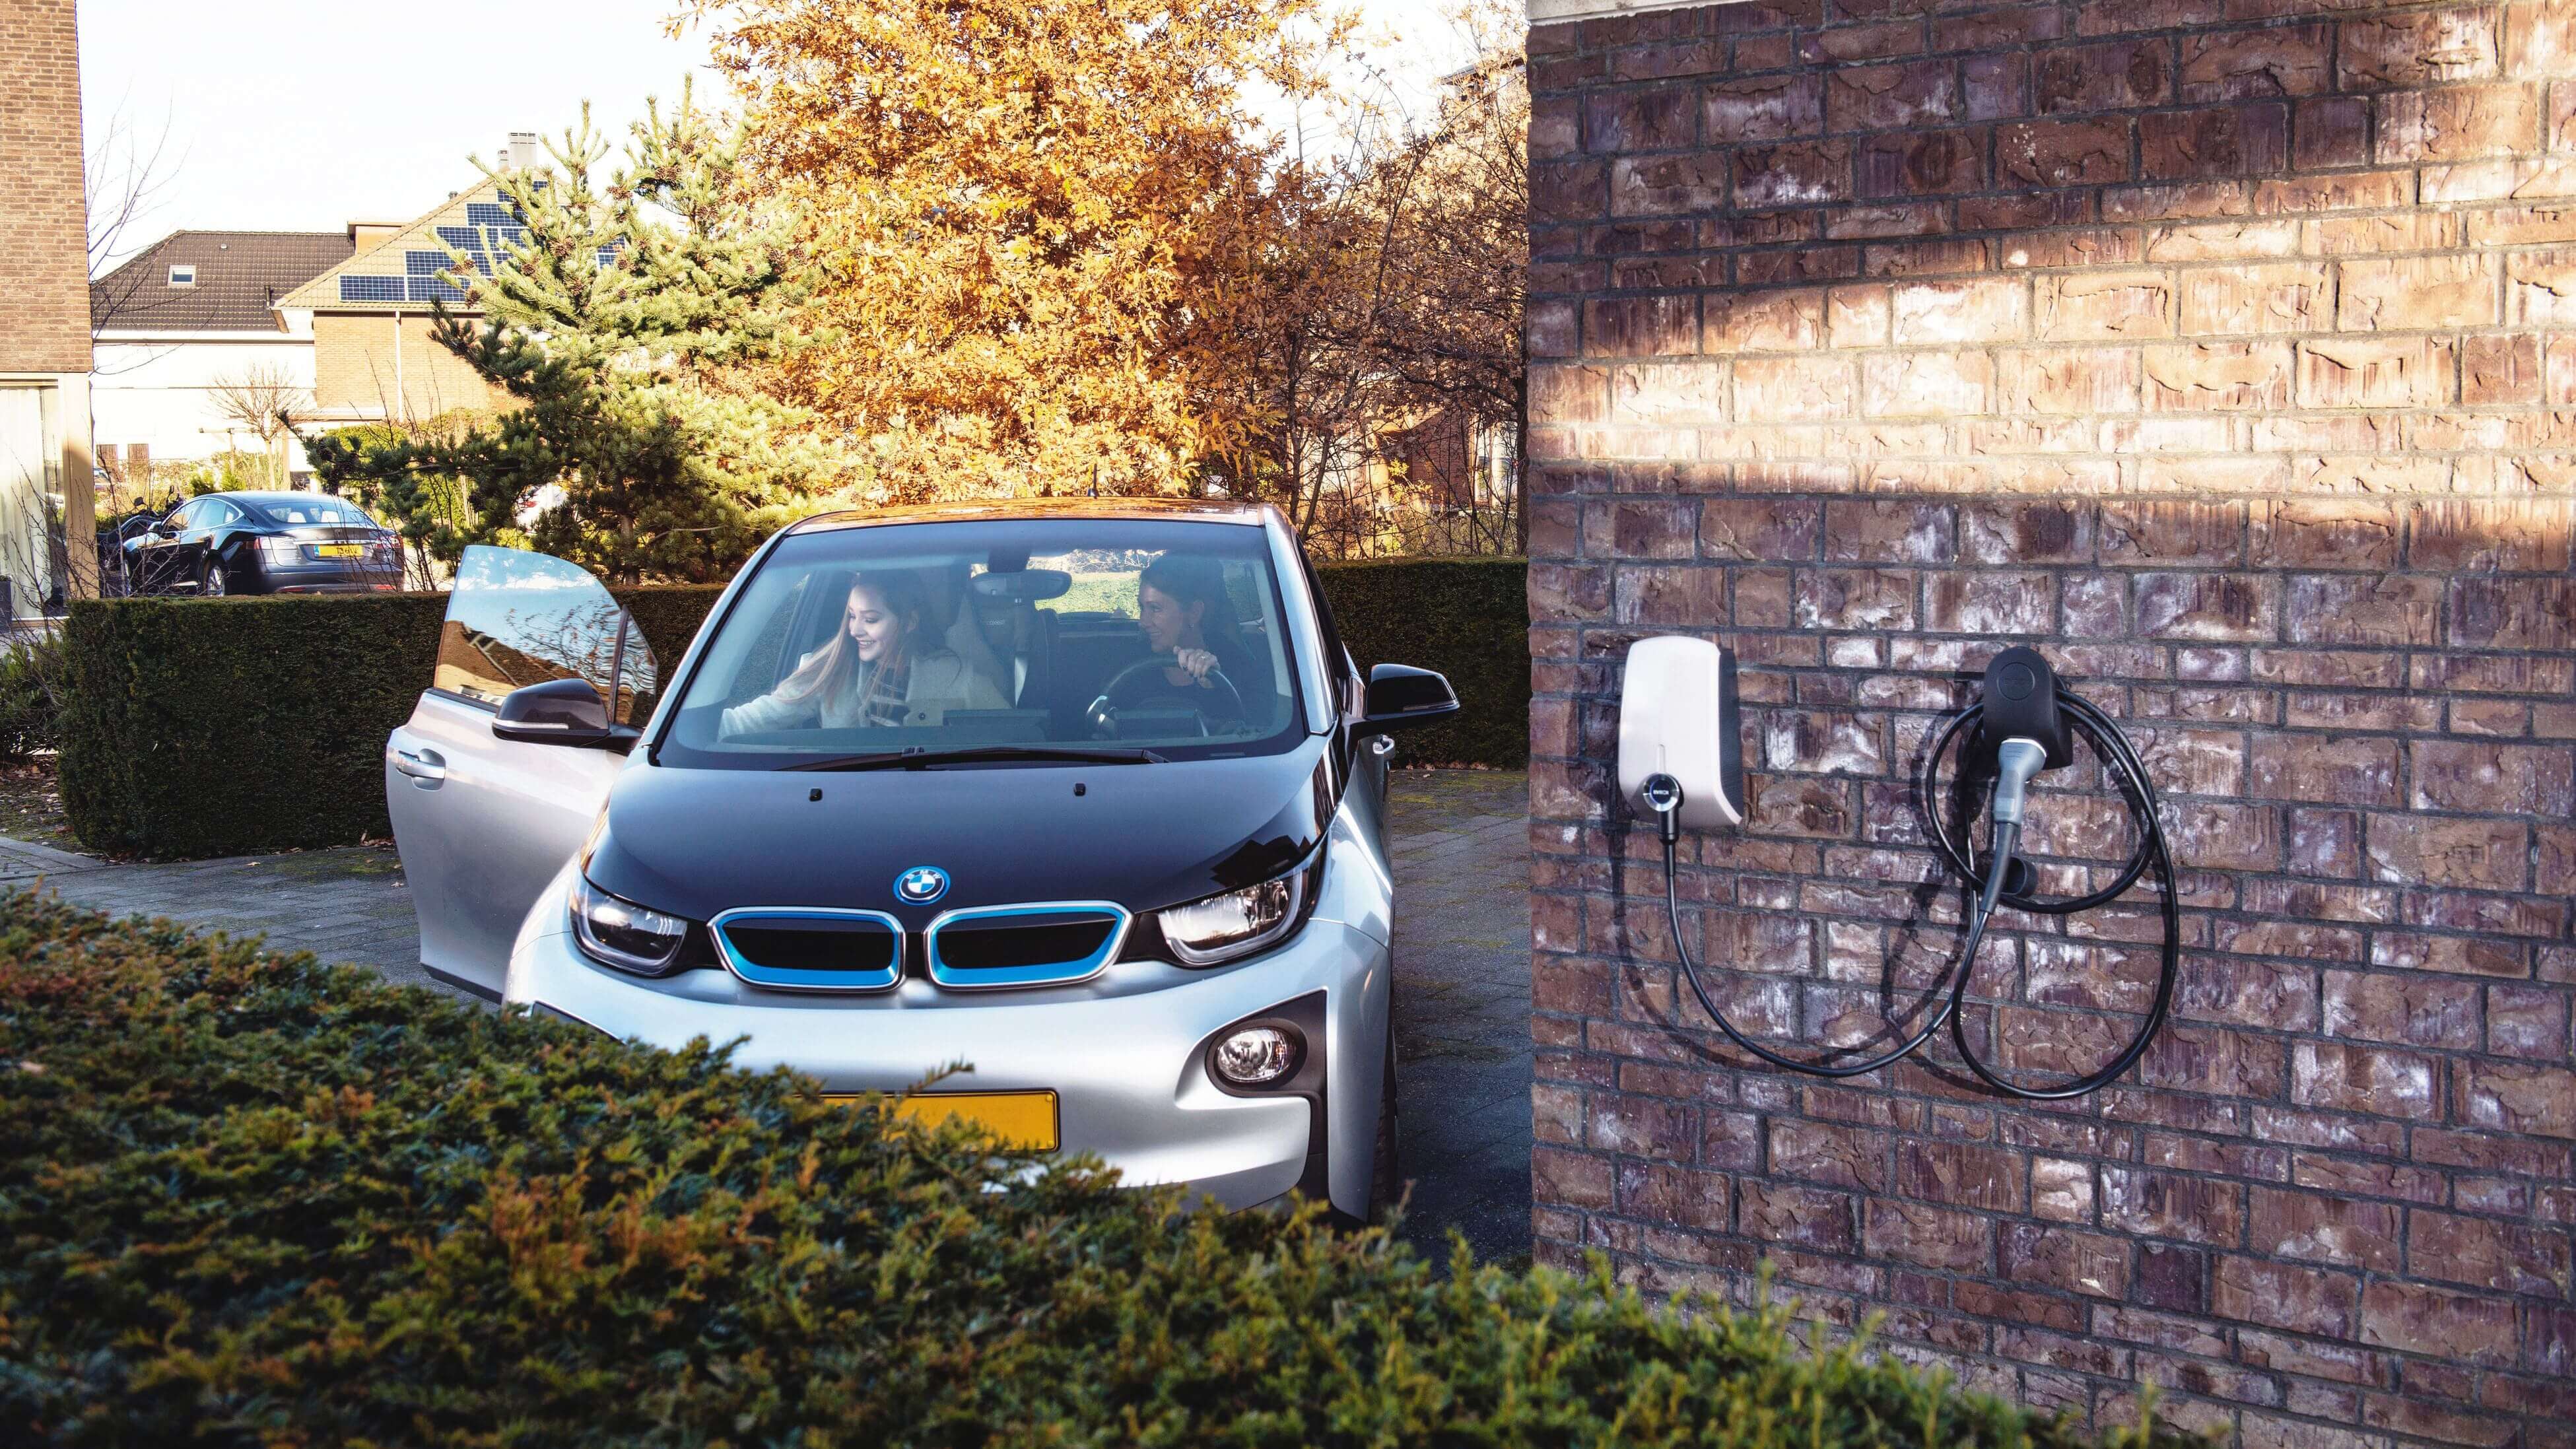 Wall mounted EVBox Elvi home charging station next to a parked car